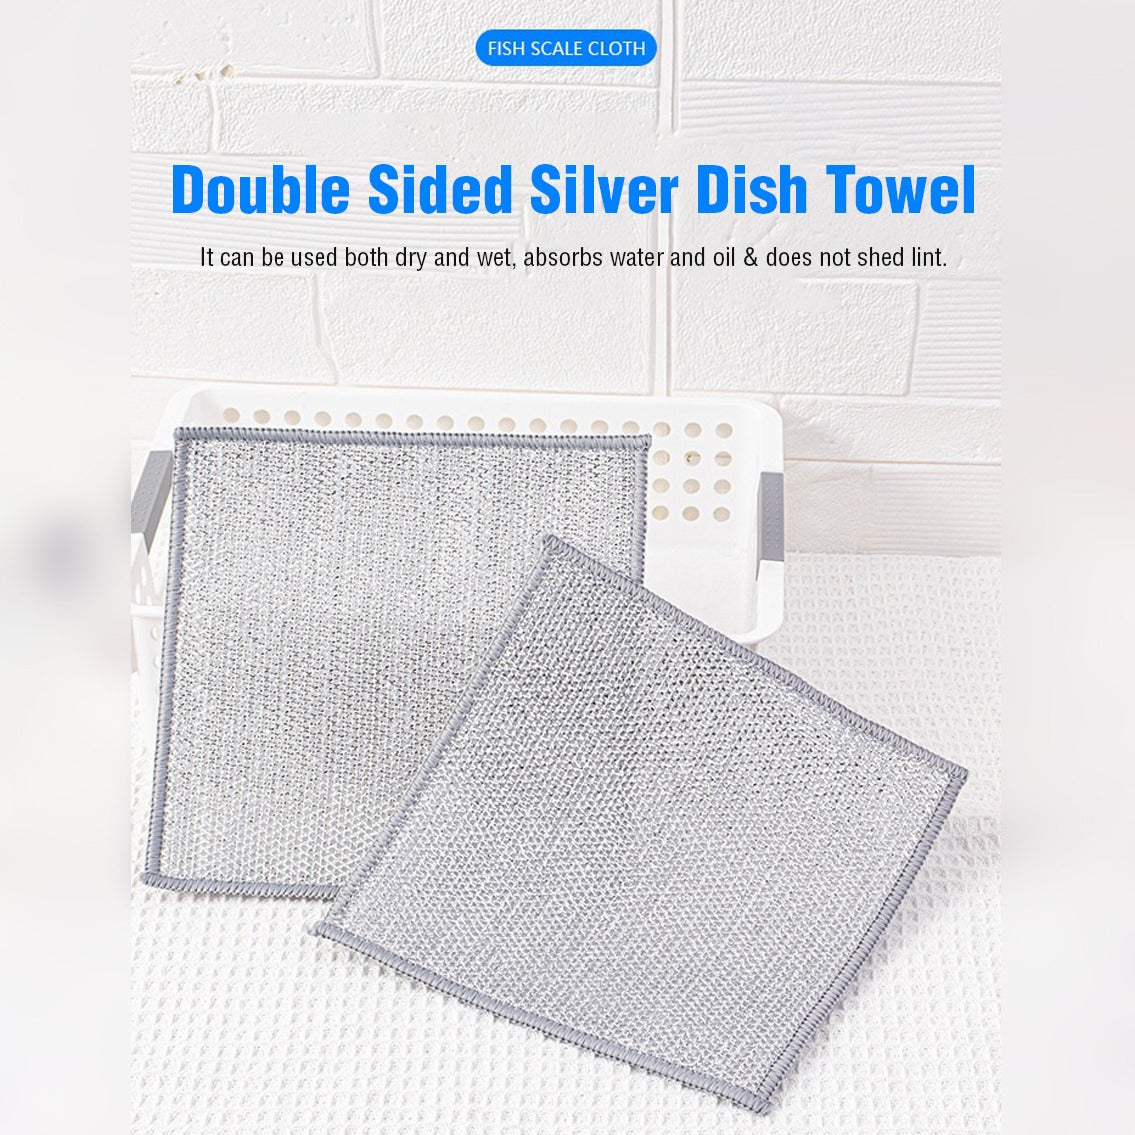 Non-Scratch Wire Dishcloth, Dishwashing Rags, Reusable Wire Cleaning Cloth For Kitchen, Sinks, Pots, Pans